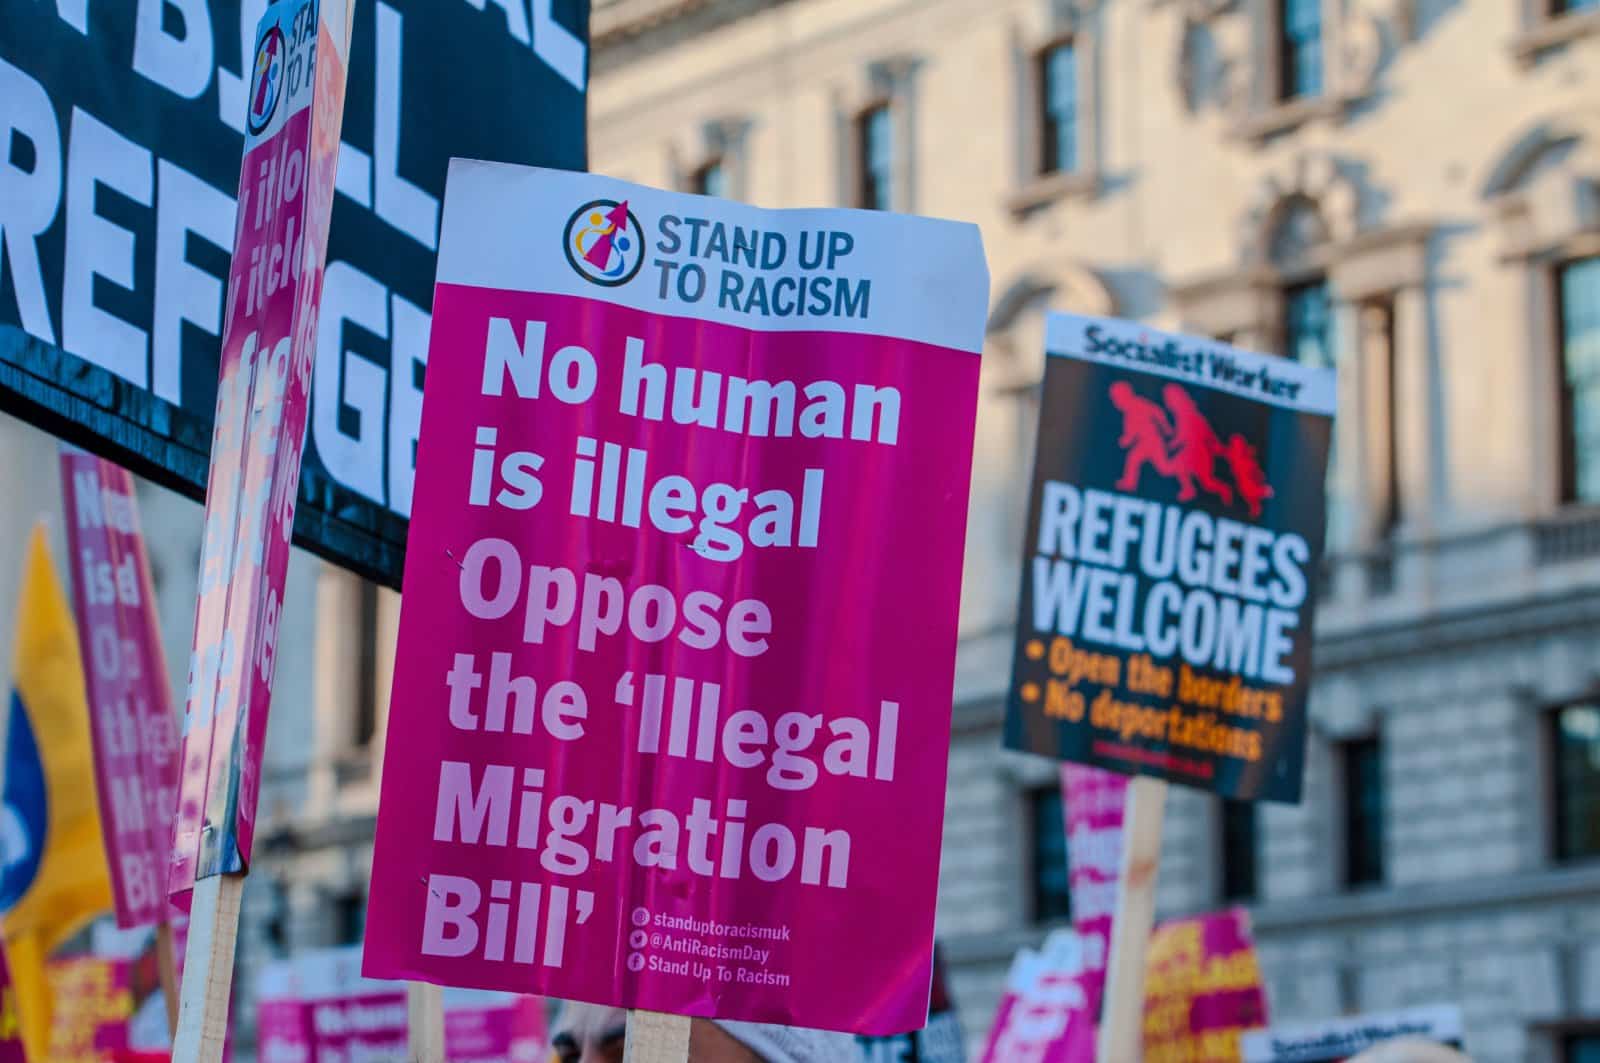 <p class="wp-caption-text">Image Credit: Shutterstock / JMundy</p>  <p>With increasing global migration and heightened political tensions, discussions about immigration policy can quickly turn contentious, with accusations of xenophobia or naivety.</p>